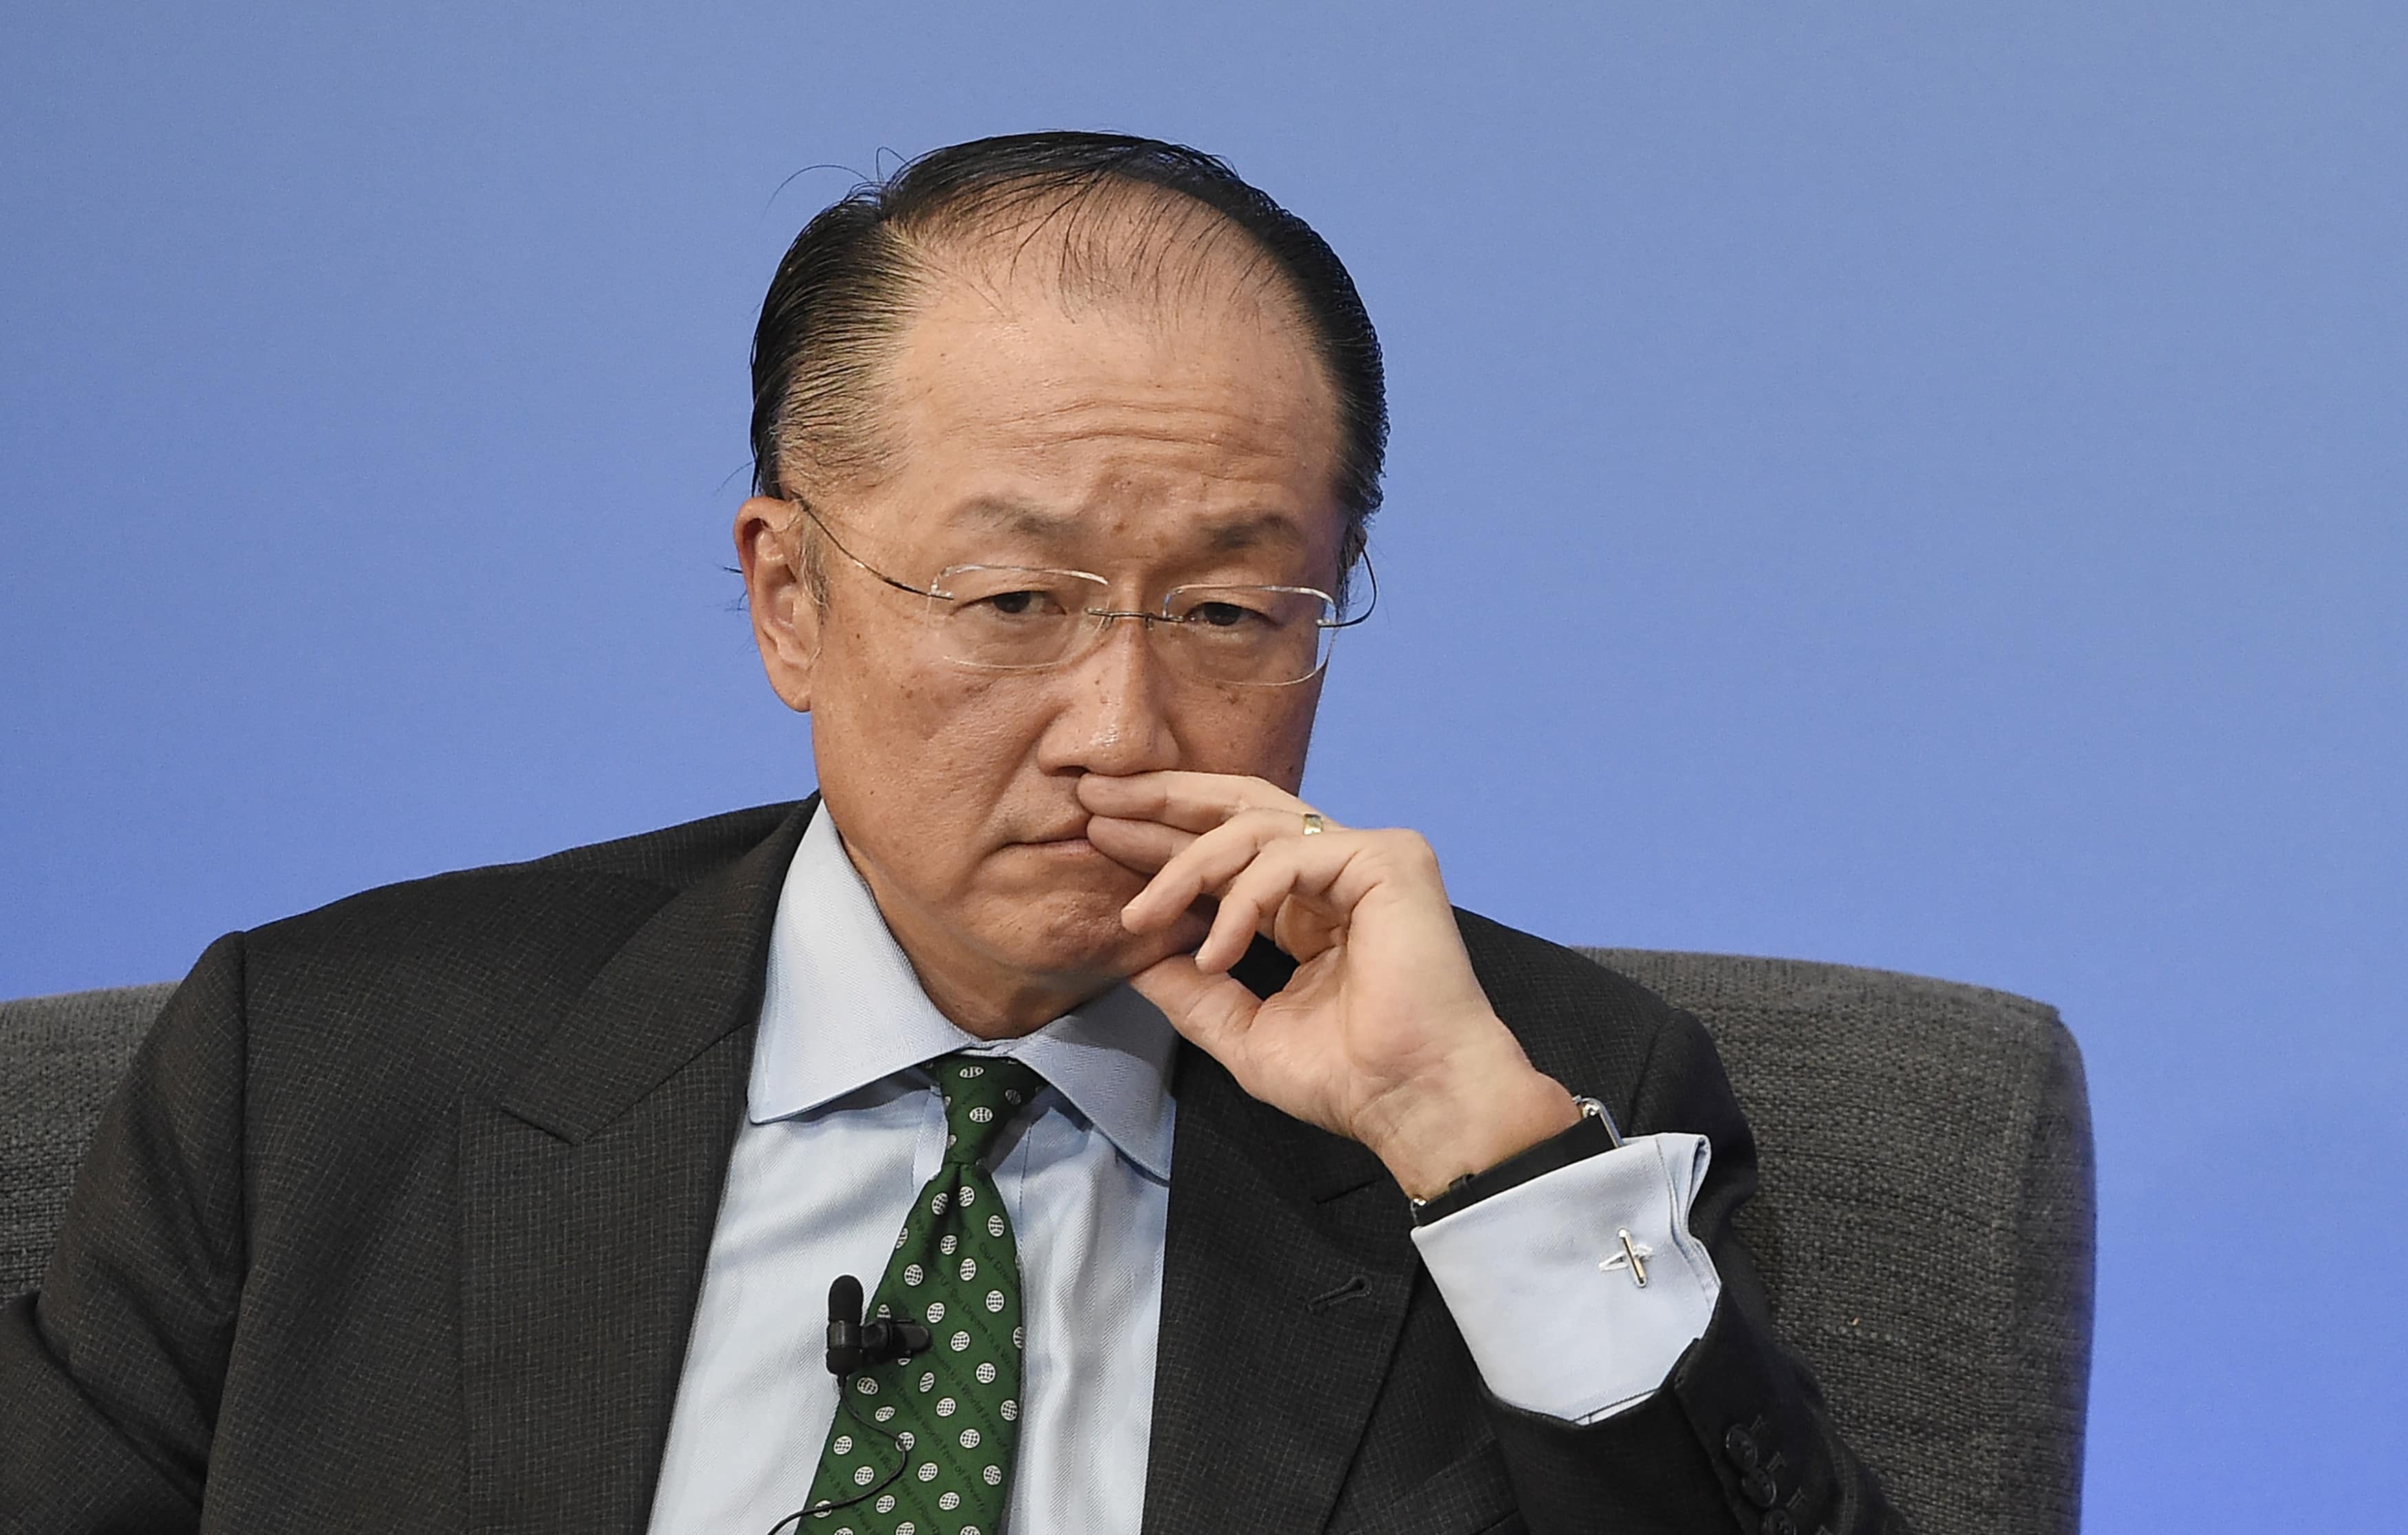 President of the World Bank Jim Yong Kim attends the during the Anti-Corruption Summit in London, England, 12 May 2016. , REUTERS/Facundo Arrizabalaga/Pool